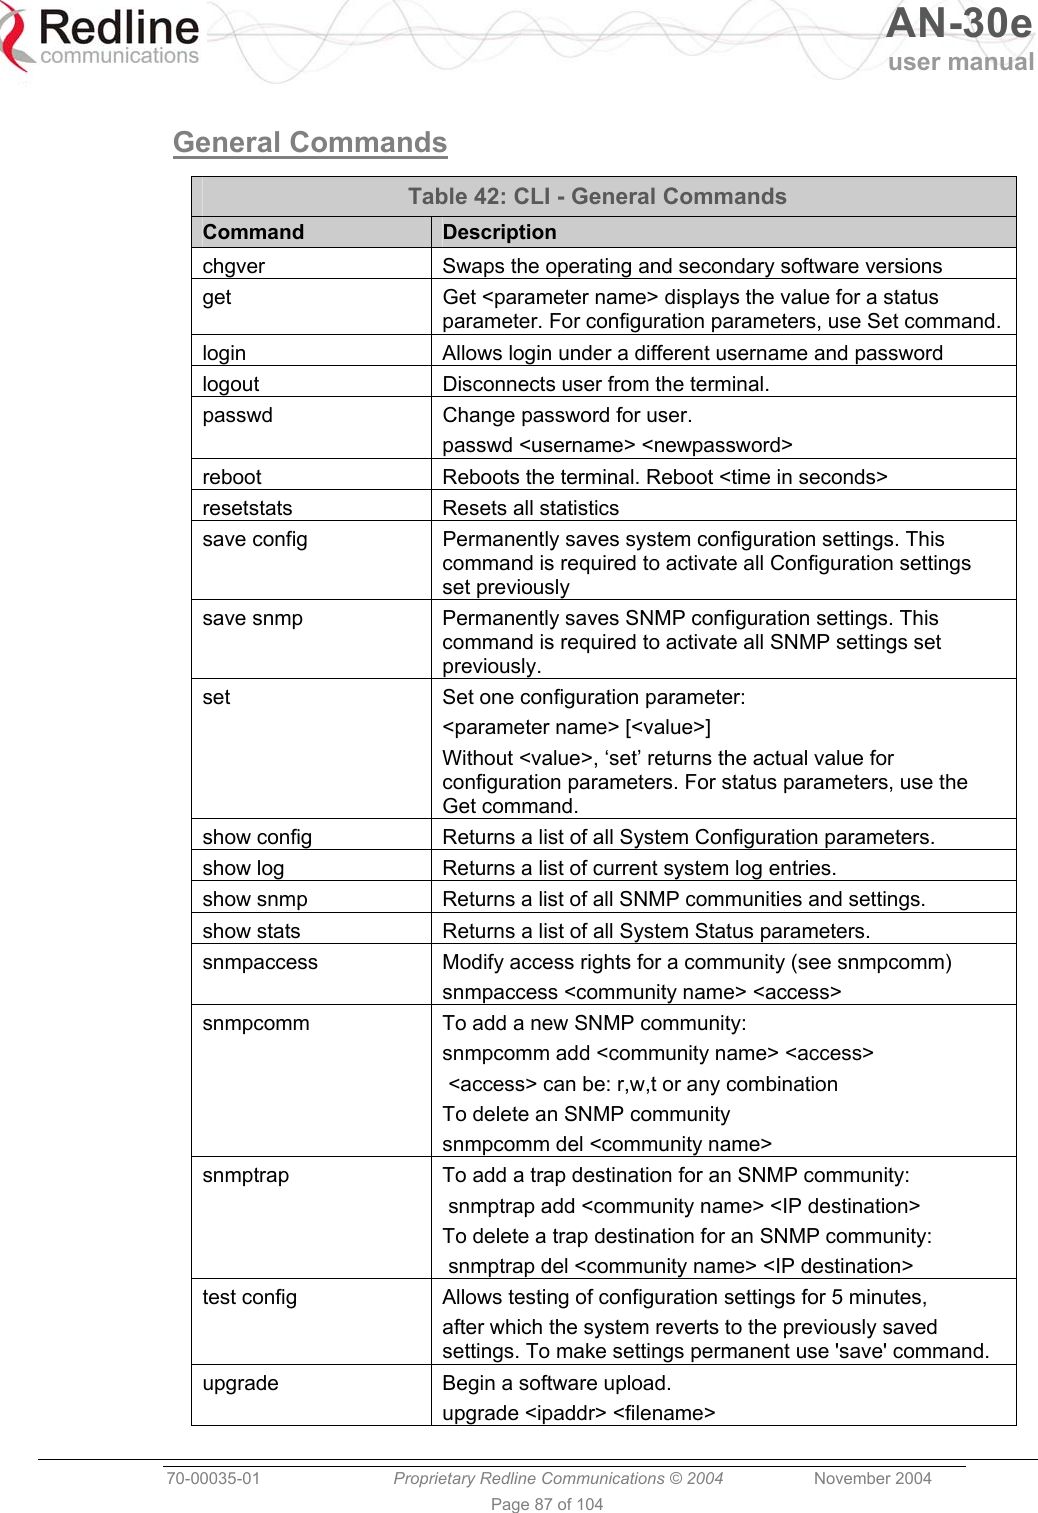   AN-30e user manual  70-00035-01  Proprietary Redline Communications © 2004 November 2004   Page 87 of 104  General Commands   Table 42: CLI - General Commands Command  Description chgver  Swaps the operating and secondary software versions  get  Get &lt;parameter name&gt; displays the value for a status parameter. For configuration parameters, use Set command. login  Allows login under a different username and password logout  Disconnects user from the terminal.  passwd  Change password for user. passwd &lt;username&gt; &lt;newpassword&gt; reboot  Reboots the terminal. Reboot &lt;time in seconds&gt; resetstats Resets all statistics save config  Permanently saves system configuration settings. This command is required to activate all Configuration settings set previously save snmp  Permanently saves SNMP configuration settings. This command is required to activate all SNMP settings set previously. set  Set one configuration parameter: &lt;parameter name&gt; [&lt;value&gt;] Without &lt;value&gt;, ‘set’ returns the actual value for configuration parameters. For status parameters, use the Get command. show config  Returns a list of all System Configuration parameters. show log  Returns a list of current system log entries. show snmp  Returns a list of all SNMP communities and settings. show stats  Returns a list of all System Status parameters. snmpaccess  Modify access rights for a community (see snmpcomm) snmpaccess &lt;community name&gt; &lt;access&gt;  snmpcomm  To add a new SNMP community: snmpcomm add &lt;community name&gt; &lt;access&gt;  &lt;access&gt; can be: r,w,t or any combination To delete an SNMP community snmpcomm del &lt;community name&gt; snmptrap  To add a trap destination for an SNMP community:  snmptrap add &lt;community name&gt; &lt;IP destination&gt; To delete a trap destination for an SNMP community:  snmptrap del &lt;community name&gt; &lt;IP destination&gt; test config  Allows testing of configuration settings for 5 minutes, after which the system reverts to the previously saved settings. To make settings permanent use &apos;save&apos; command. upgrade  Begin a software upload. upgrade &lt;ipaddr&gt; &lt;filename&gt;  